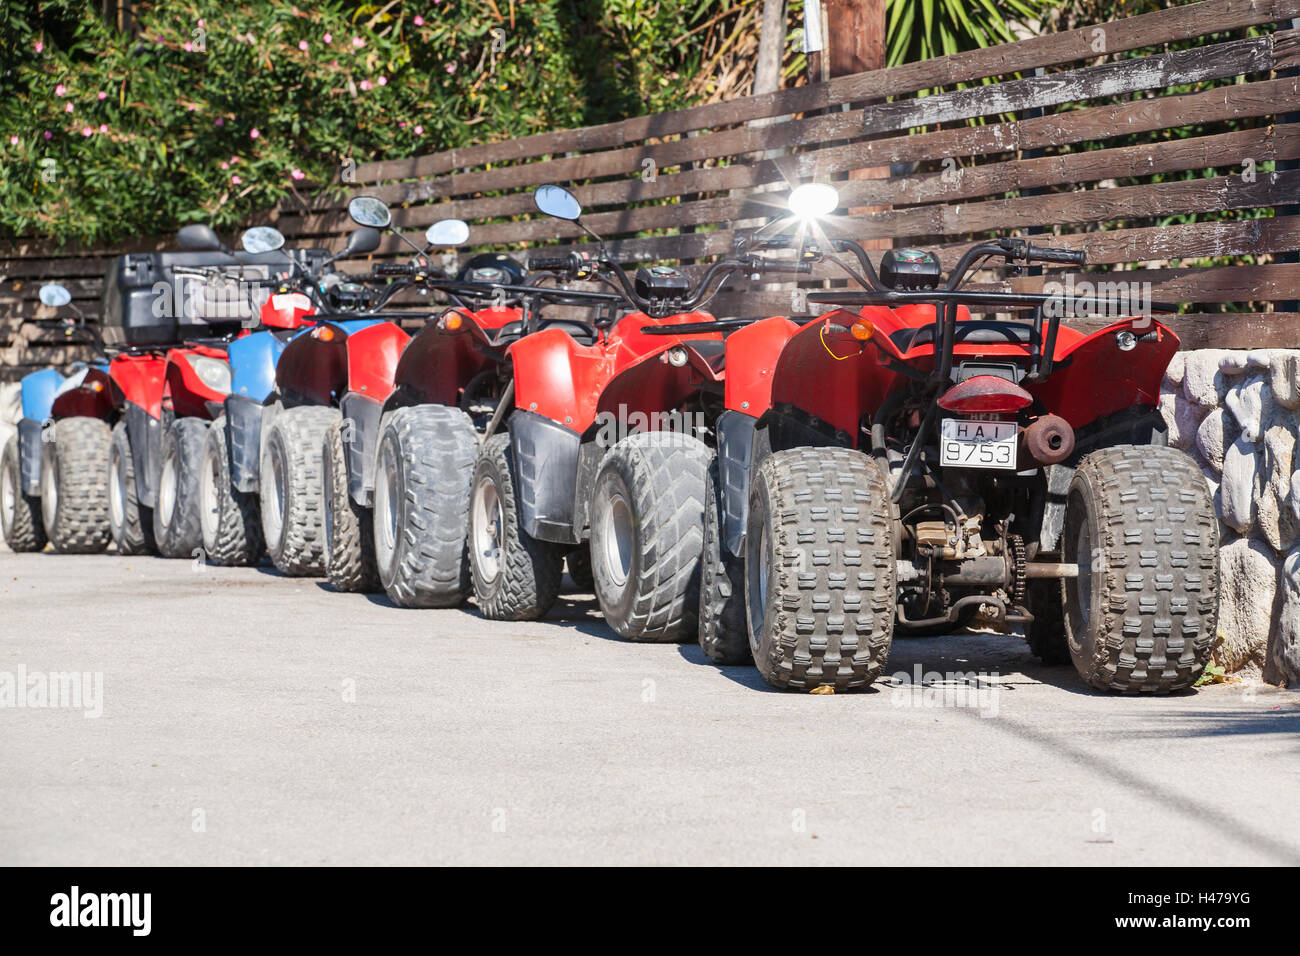 Zakynthos, Greece - August 14, 2016: Red and blue atv quad bikes stand parked in a row on roadside. Popular tourist mode of tran Stock Photo